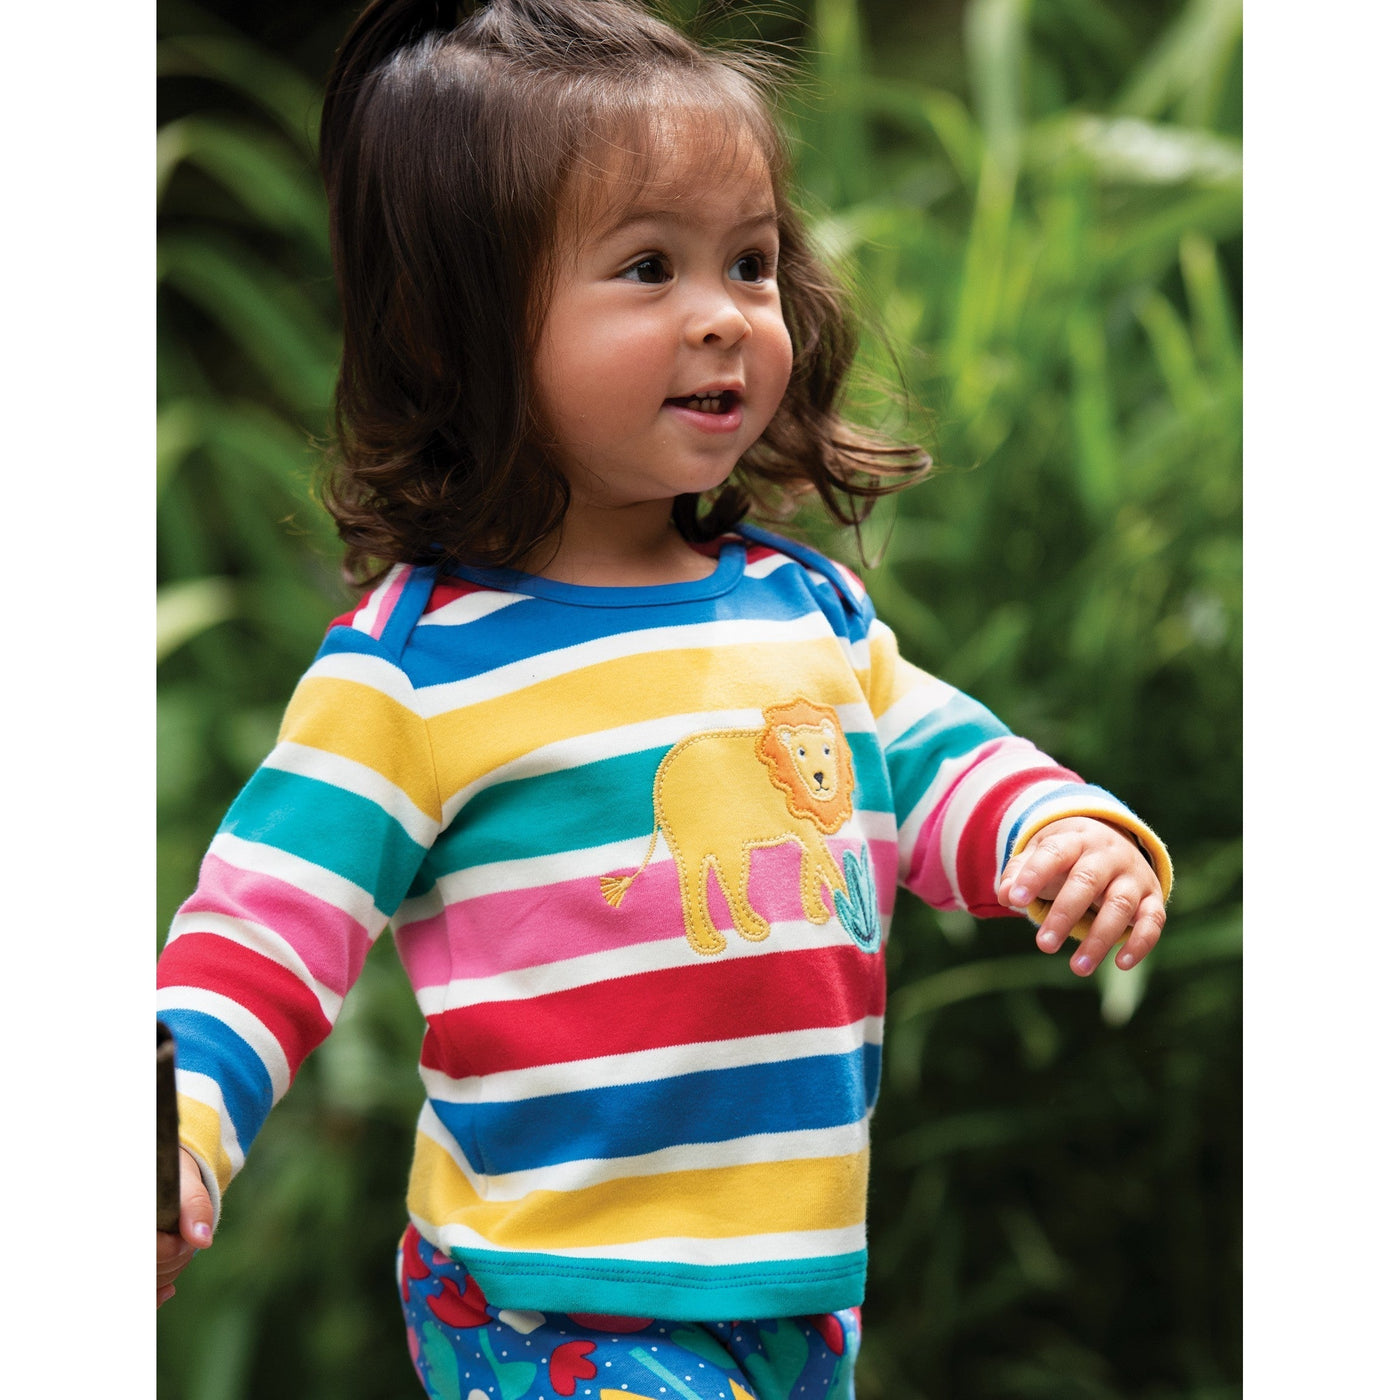 Bobby Applique Top - Rainbow Multistripe-Lion by Frugi